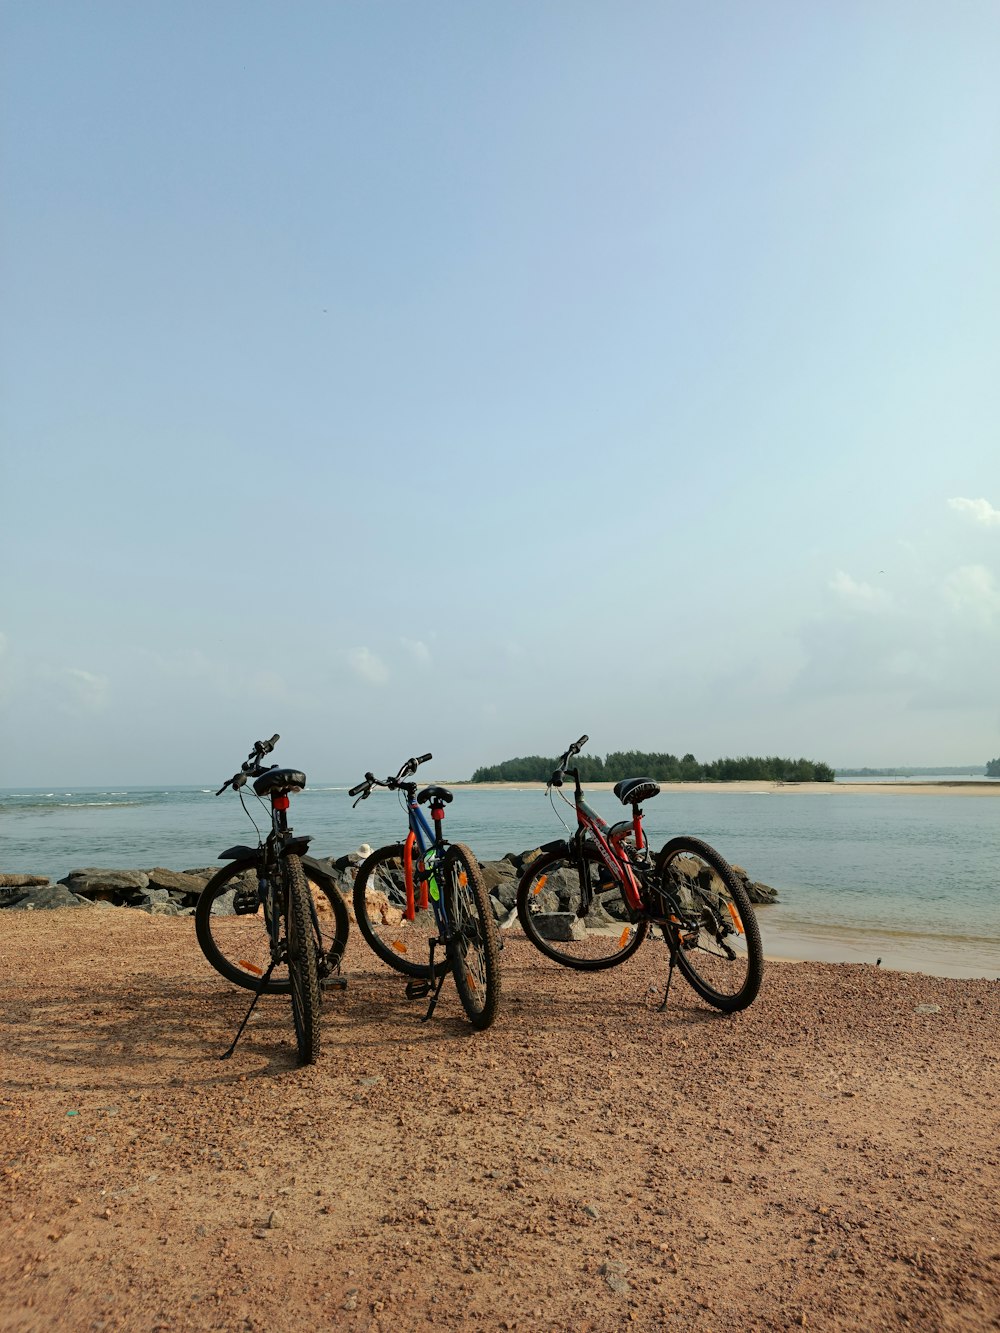 three bikes are parked on the beach by the water